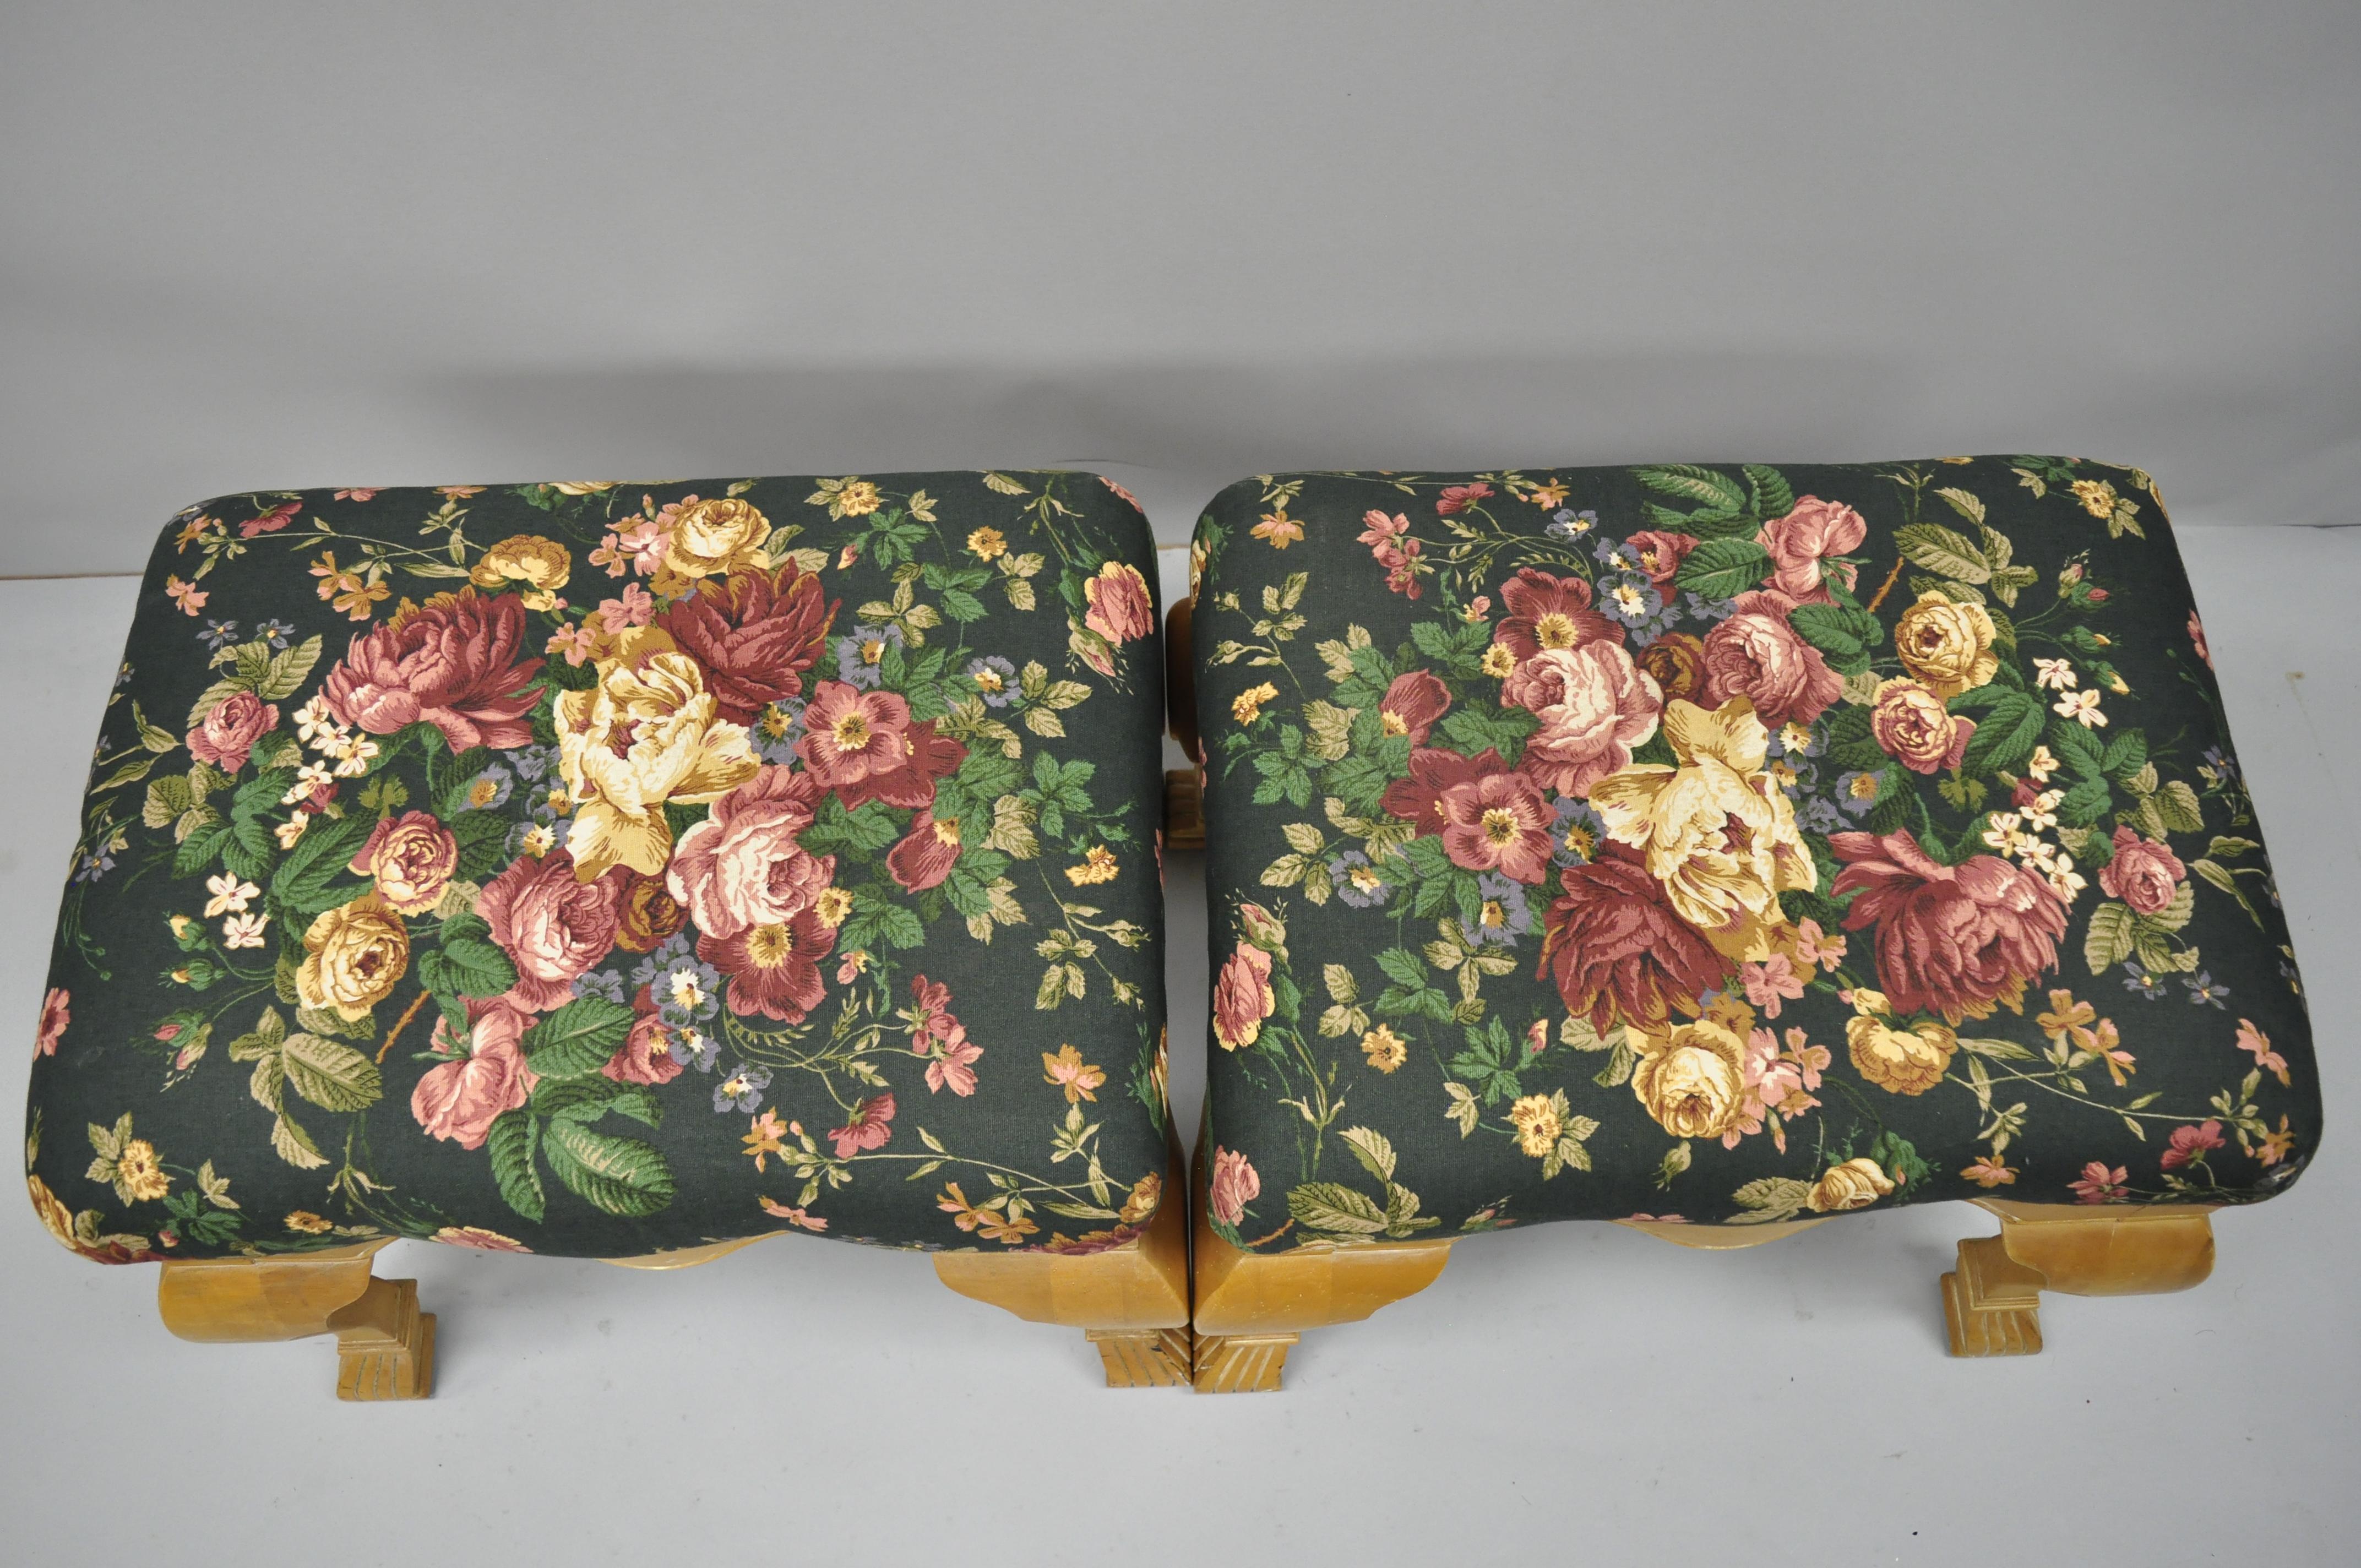 Pair of Country French Style Cabriole Leg Hoof Foot Upholstered Stools Benches In Good Condition For Sale In Philadelphia, PA